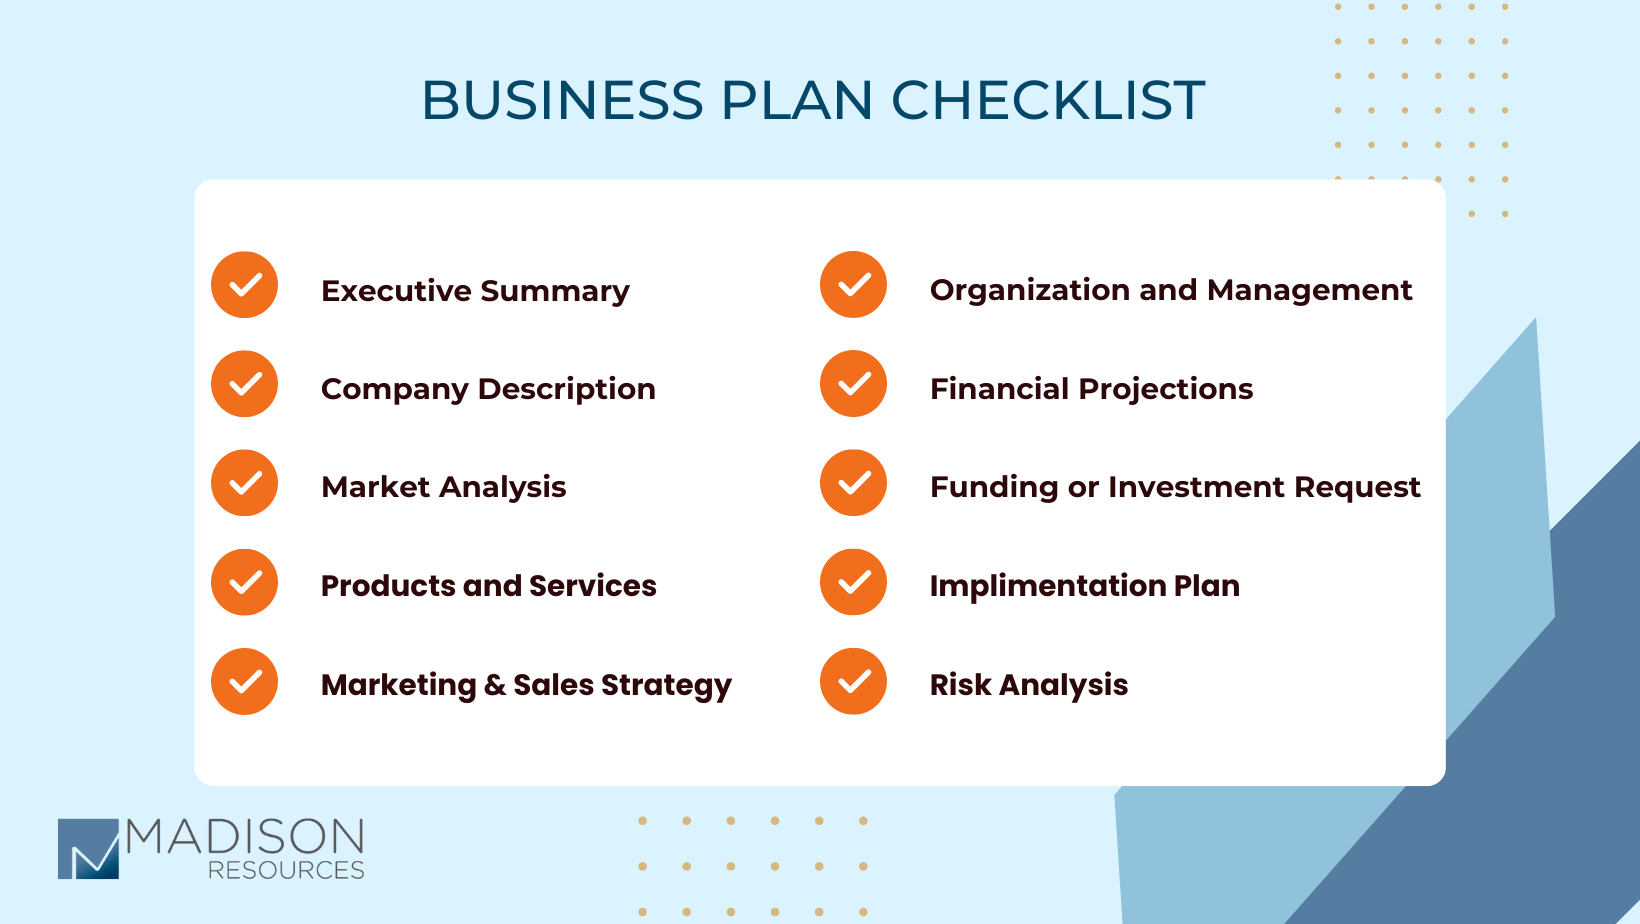 business plan checklist, executive summary, company description, market analysis, product and services, marketing & sales strategy, organization and management, financial projections, funding or investment request, implementation plan, risk analysis.